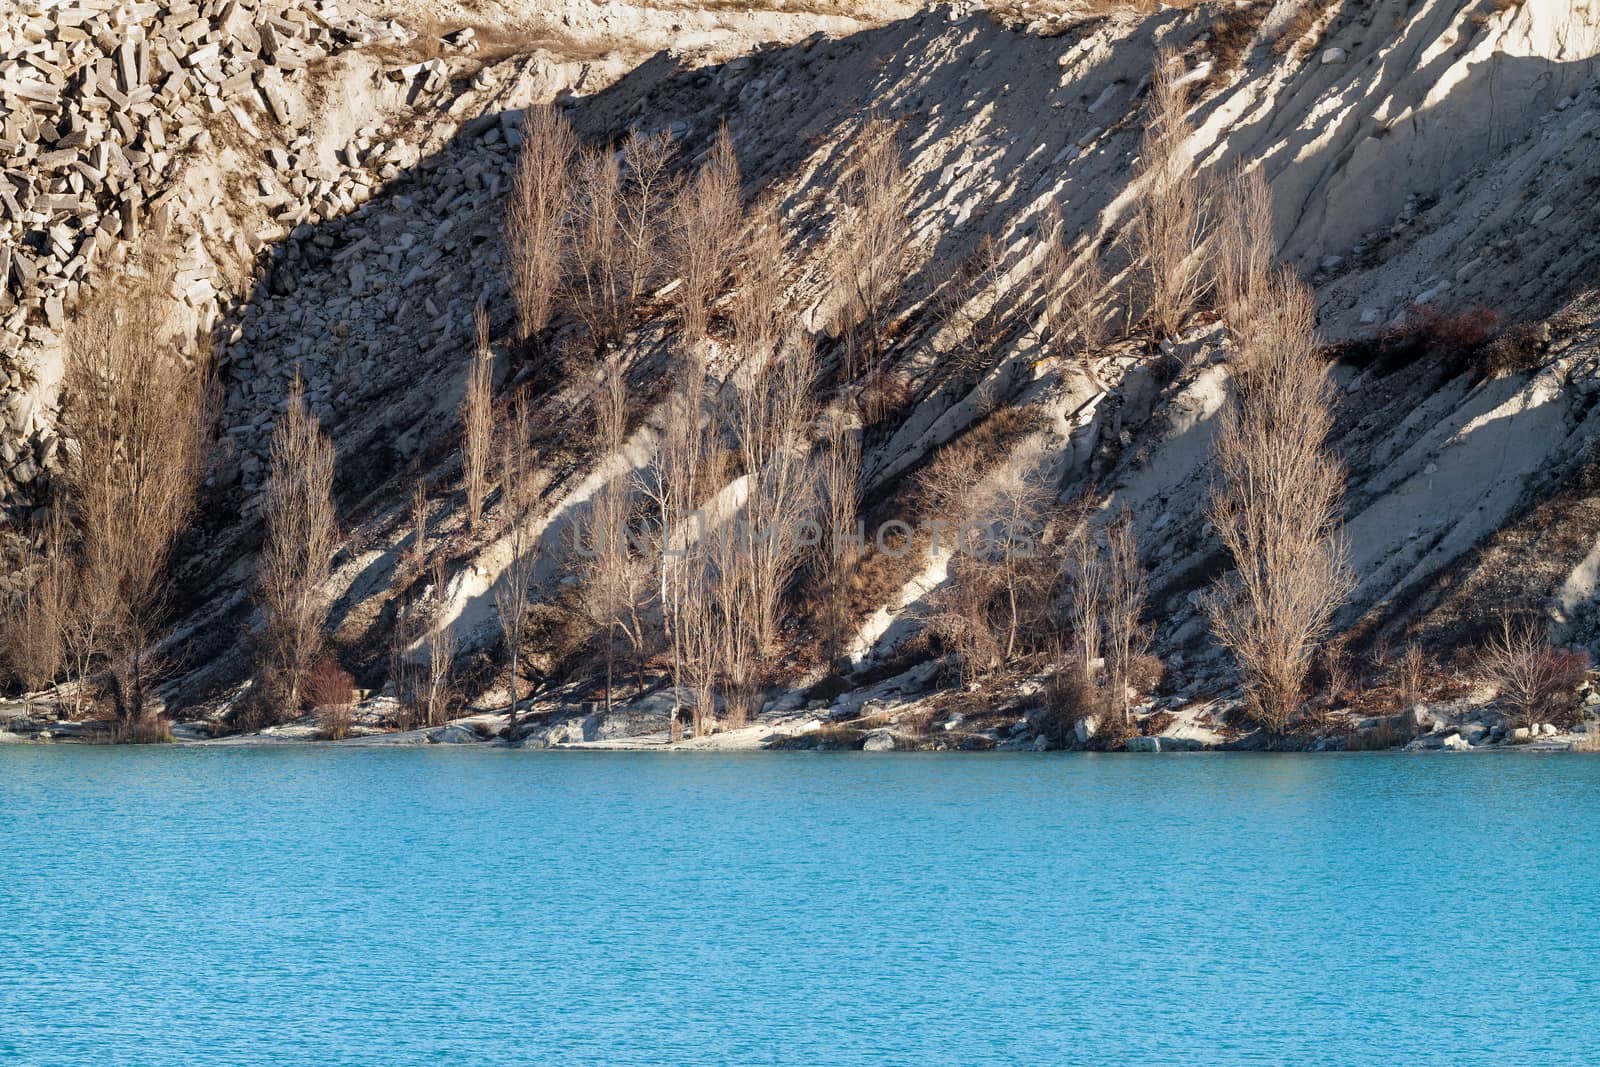 Lake emerald-turquoise color formed in an old quarry